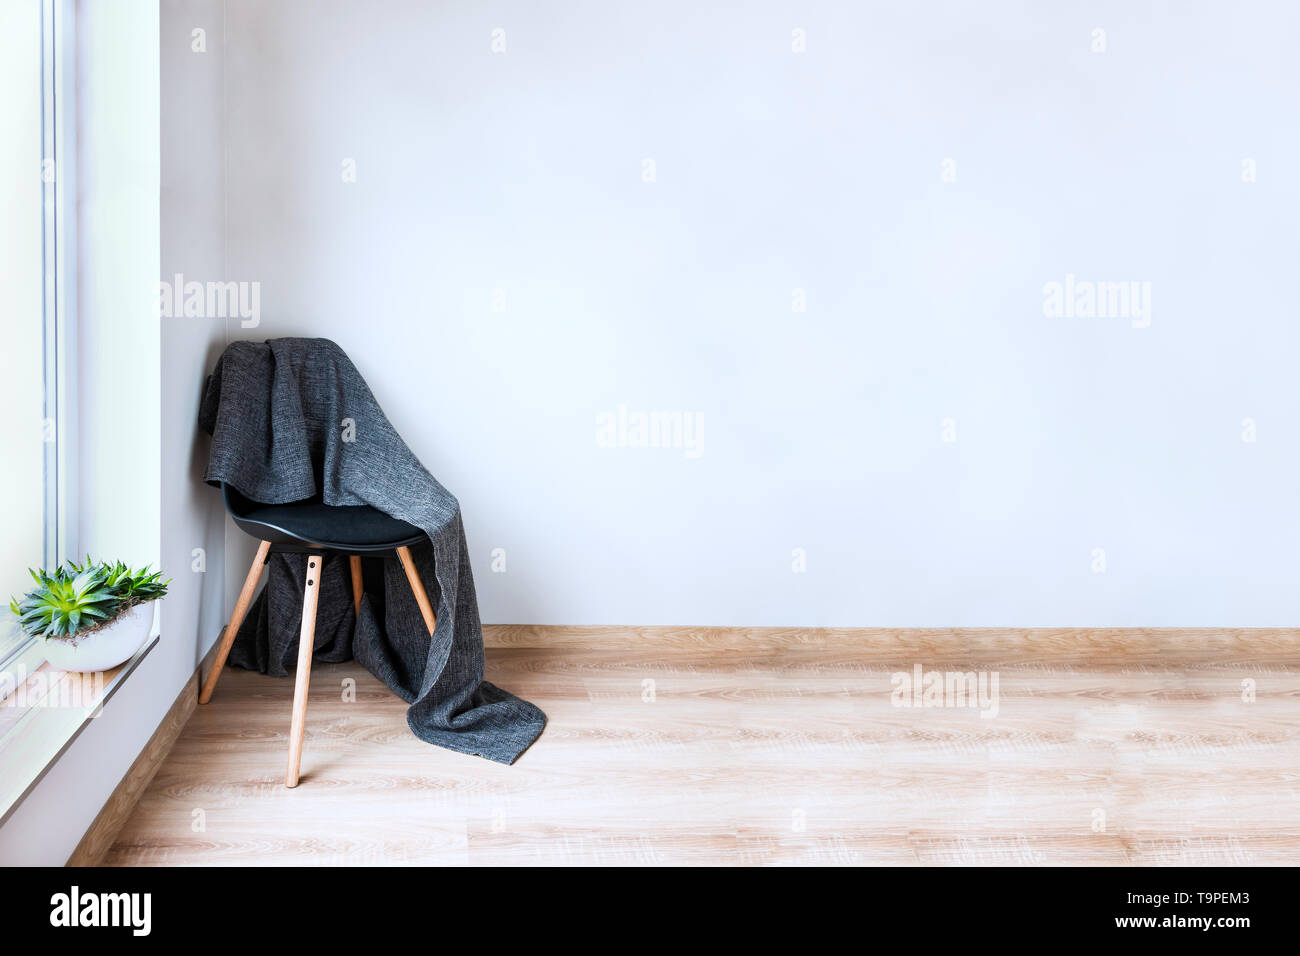 Contemporary home interior. Black chair covered with woolen gray blanket in front of an empty white wall. Succulent plant on the window. Stock Photo